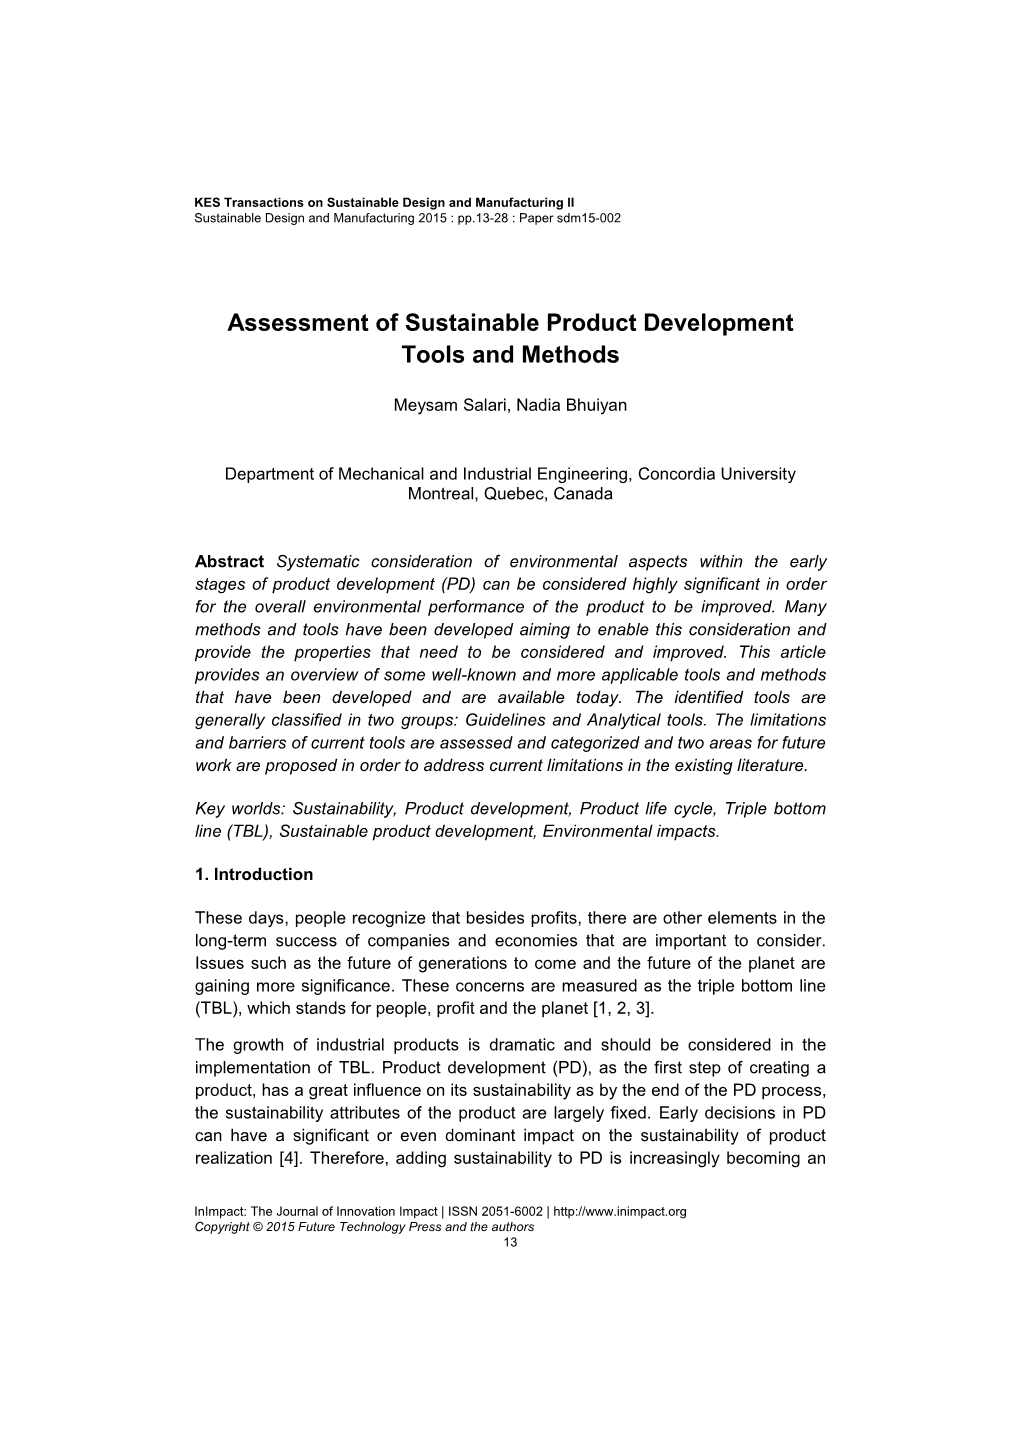 Assessment of Sustainable Product Development Tools and Methods